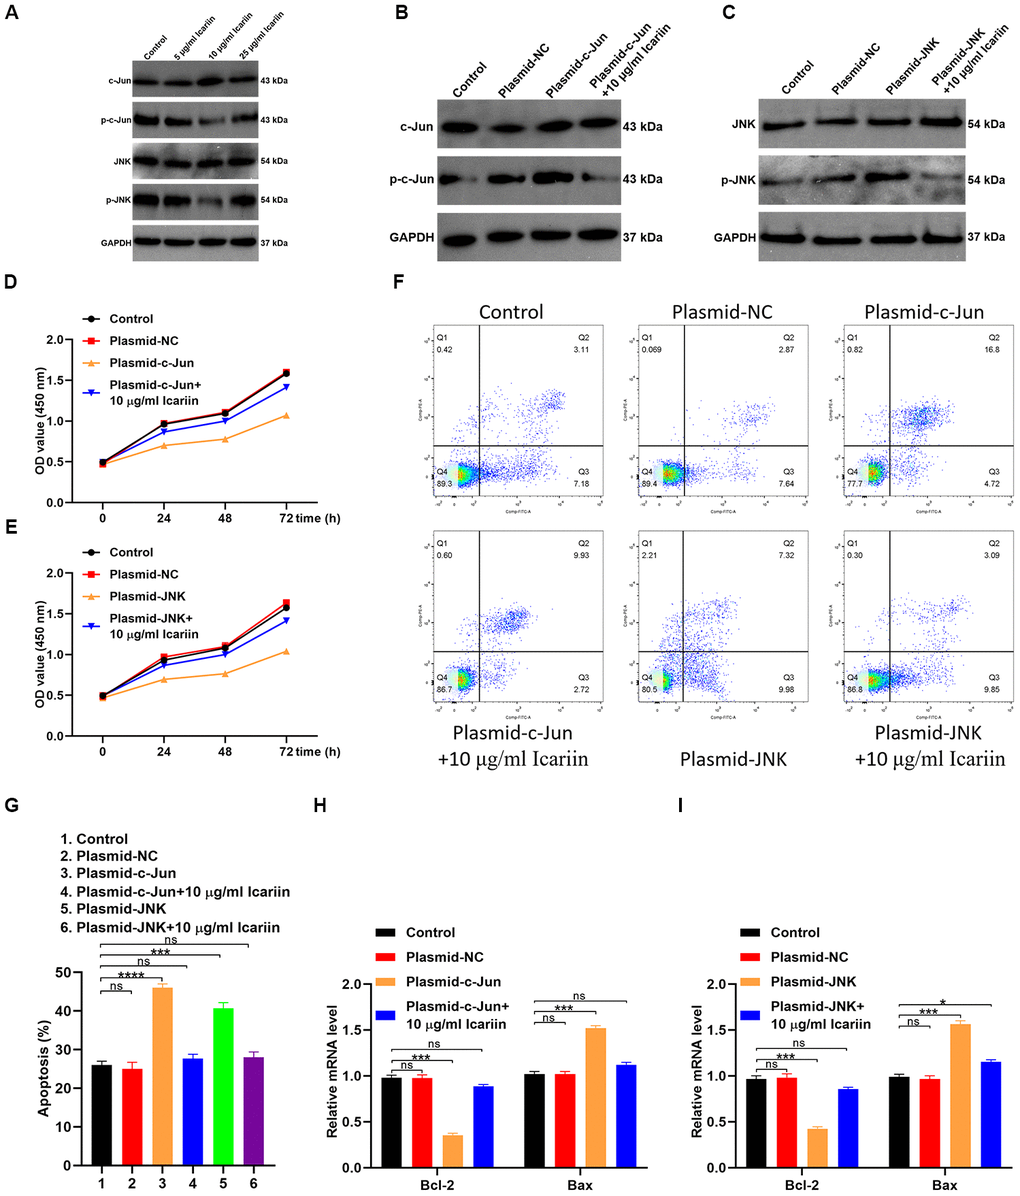 Icariin inhibits apoptosis of hMSCs by suppressing c-Jun/JNK signaling. (A) Expression of c-Jun, p-c-Jun, JNK, and p-JNK analyzed in icariin-treated hMSCs by western blotting; (B, C) Phosphorylation levels of c-Jun and JNK in hMSCs transfected with c-Jun or JNK plasmids and treated with icariin (10 μg/ml), analyzed by western blotting; (D, E) CCK-8 proliferation assay of icariin-treated hMSCs; (F) Apoptosis analyzed by flow cytometry of icariin-treated hMSCs; (G) Apoptosis analyzed in hMSCs transfected with c-Jun and JNK plasmids, and treated with icariin; (H, I) Bcl-2 and Bax mRNA levels analyzed by qRT-PCR.